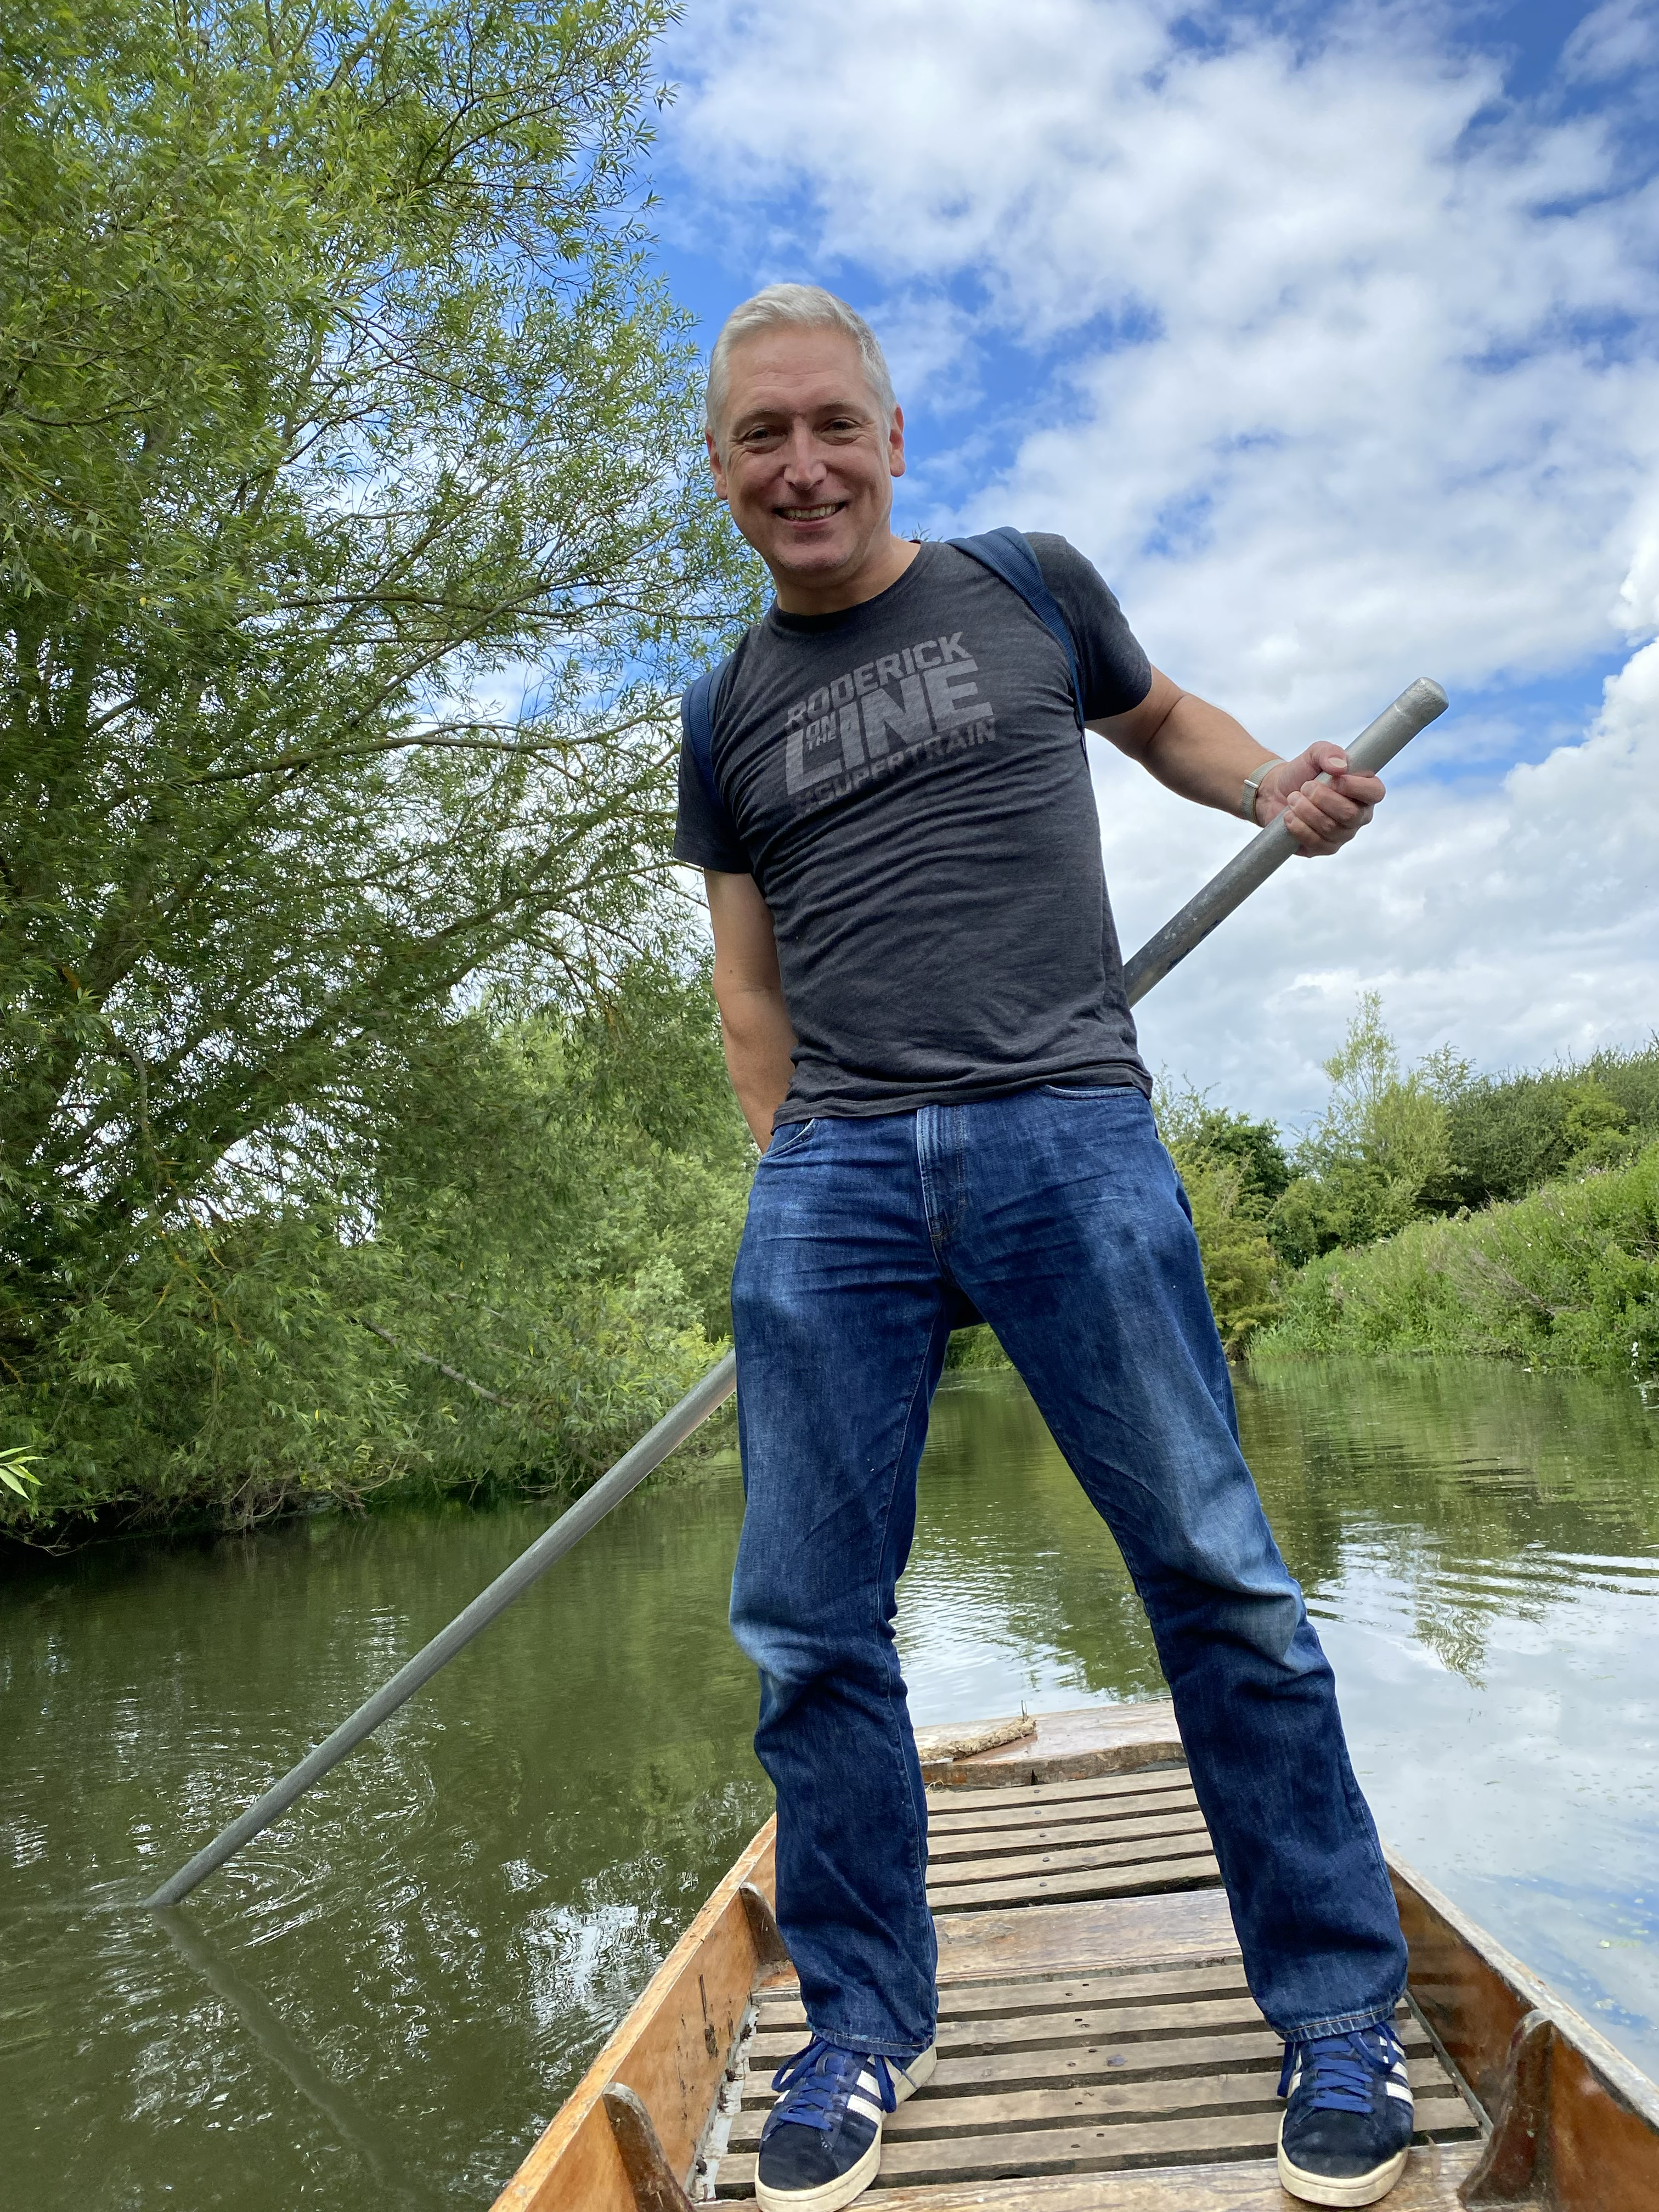 Picture of Daniel standing at the back of a British punting boat, long pole behind his back, standing akimbo. He’s wearing a “Roderick on the Line” t-shirt, surrounded by Oxford’s Cherwell river and greenery around.